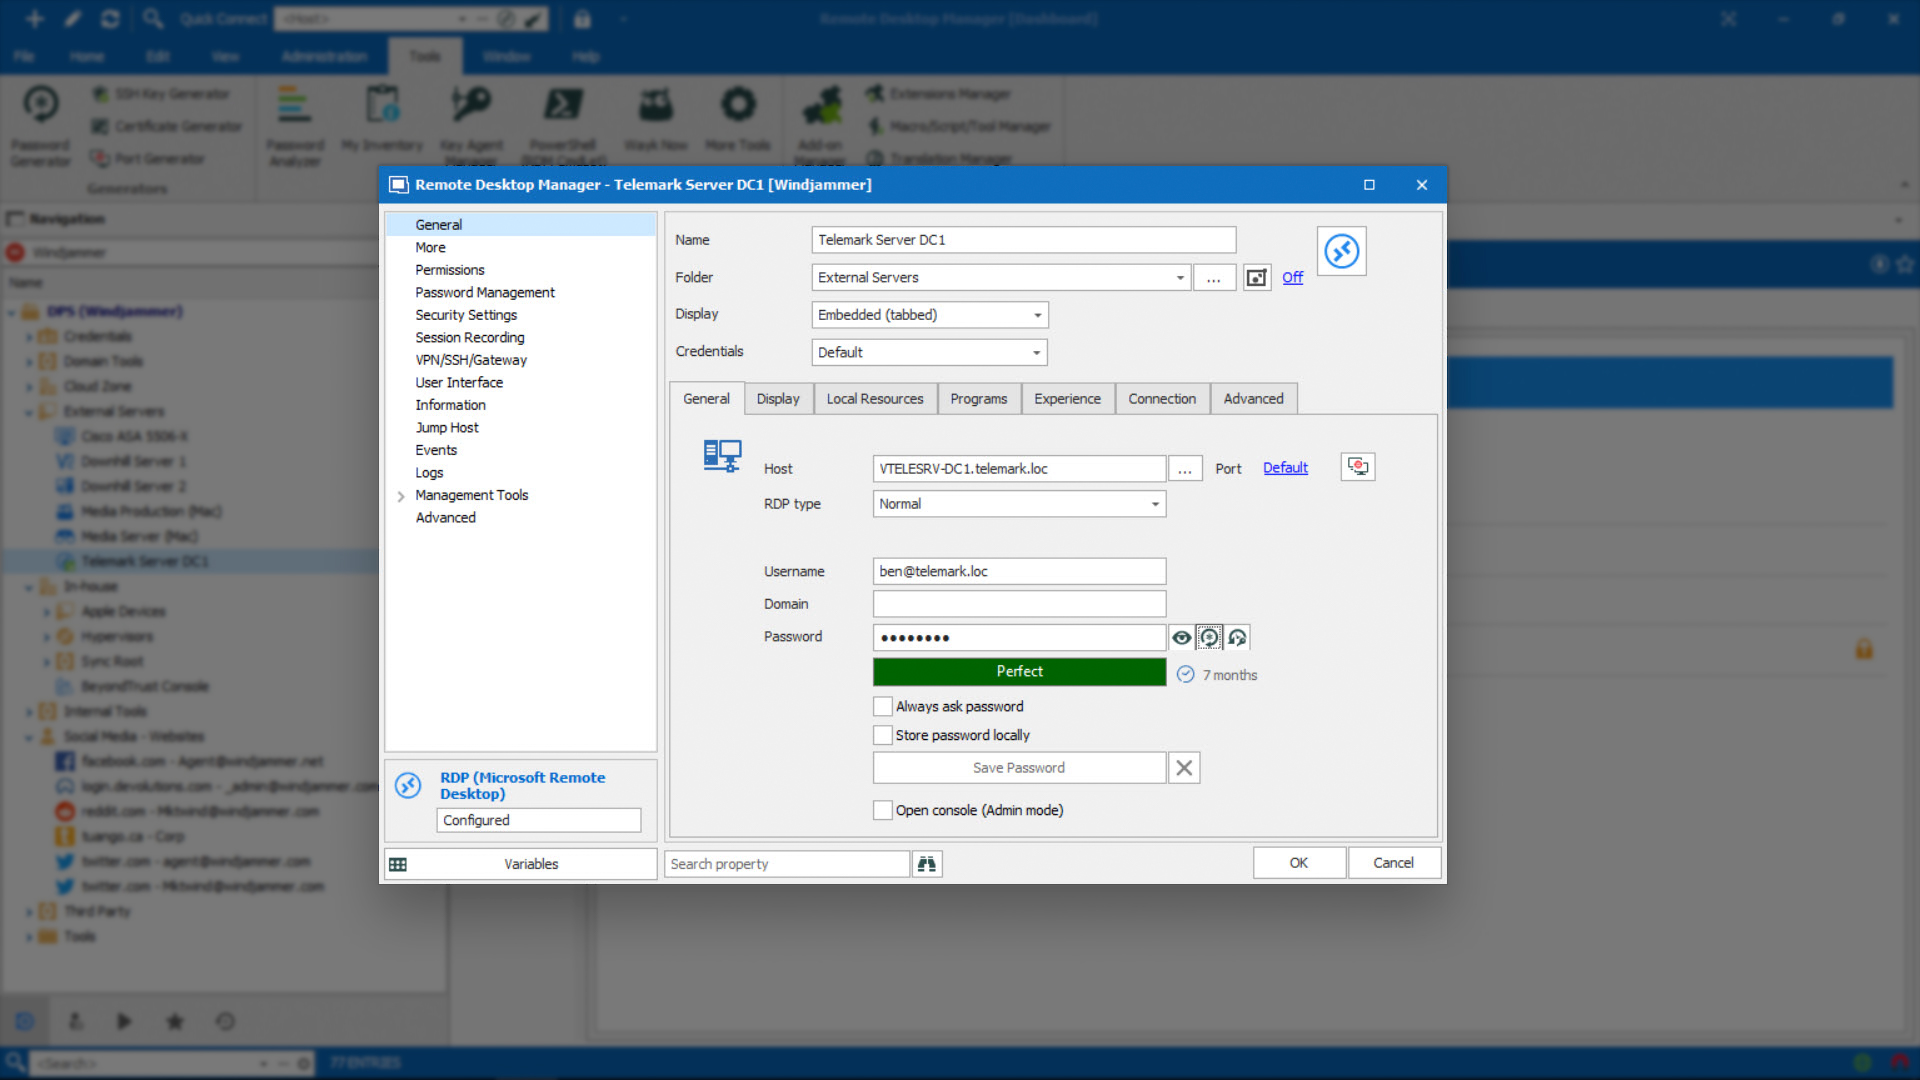 Fully Customize Entries to Suit Your Needs - Remote Desktop Manager